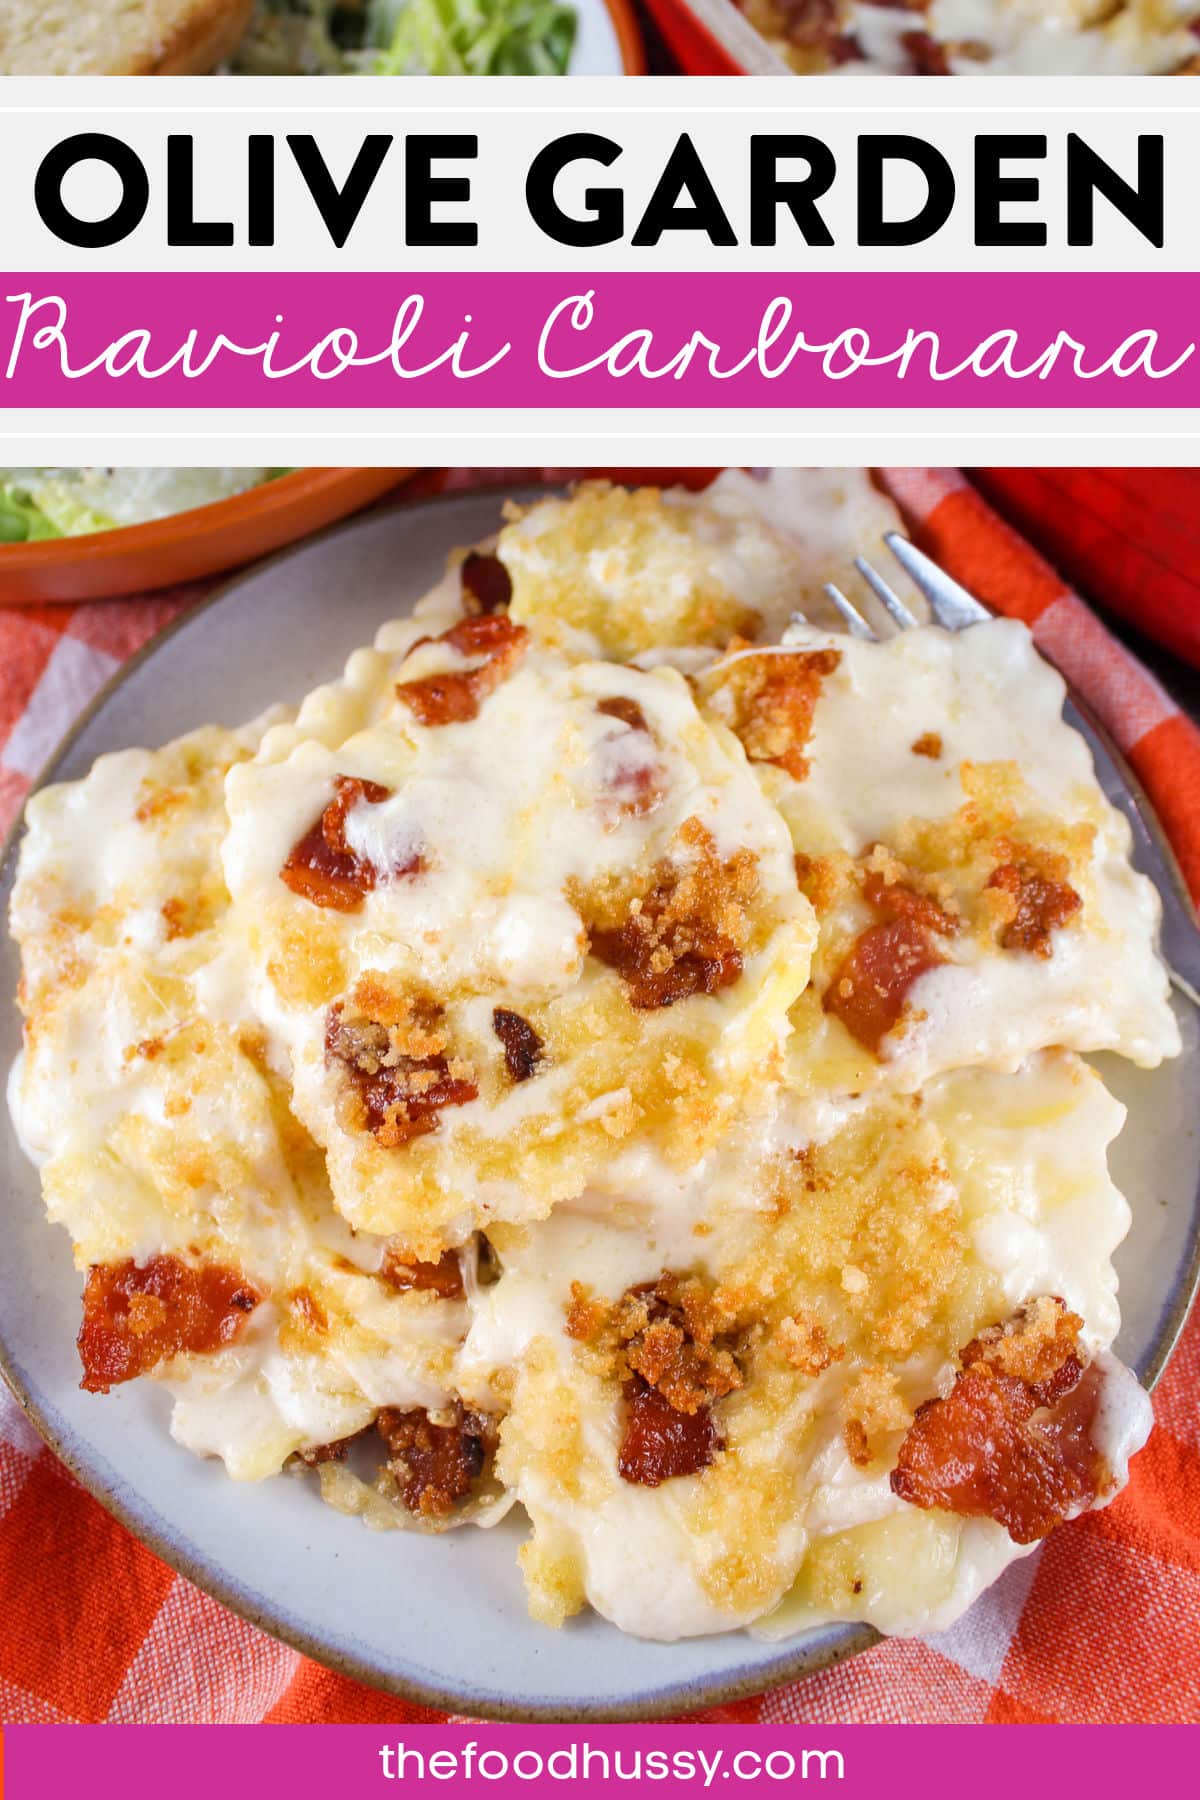 Olive Garden Ravioli Carbonara is a creamy and delicious dish! Loads of cheese ravioli coated in this delicious alfredo carbonara sauce topped with smoky bacon pieces, more cheese and a crunchy topping! via @foodhussy